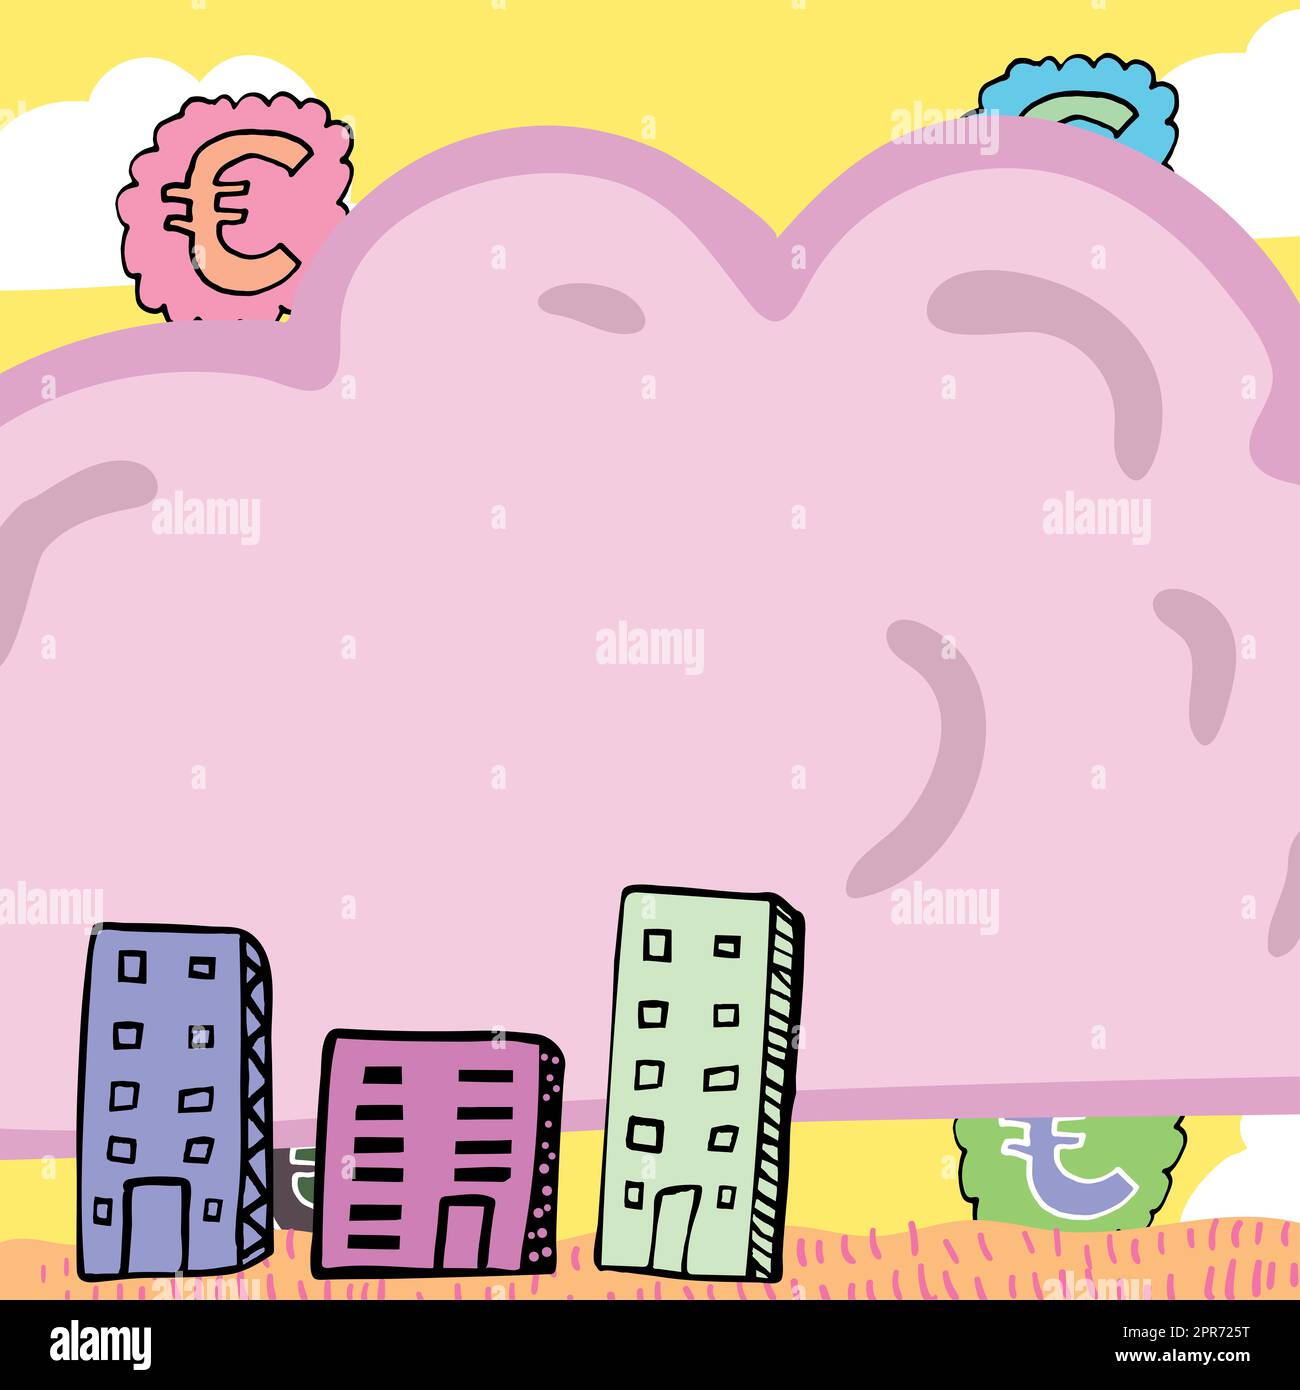 Important Message Written In Shape Of Cloud With Euro Signs In Background And Buildings. Crutial Informations In Cloudy Form With Symbols And Houses Around. Stock Photo